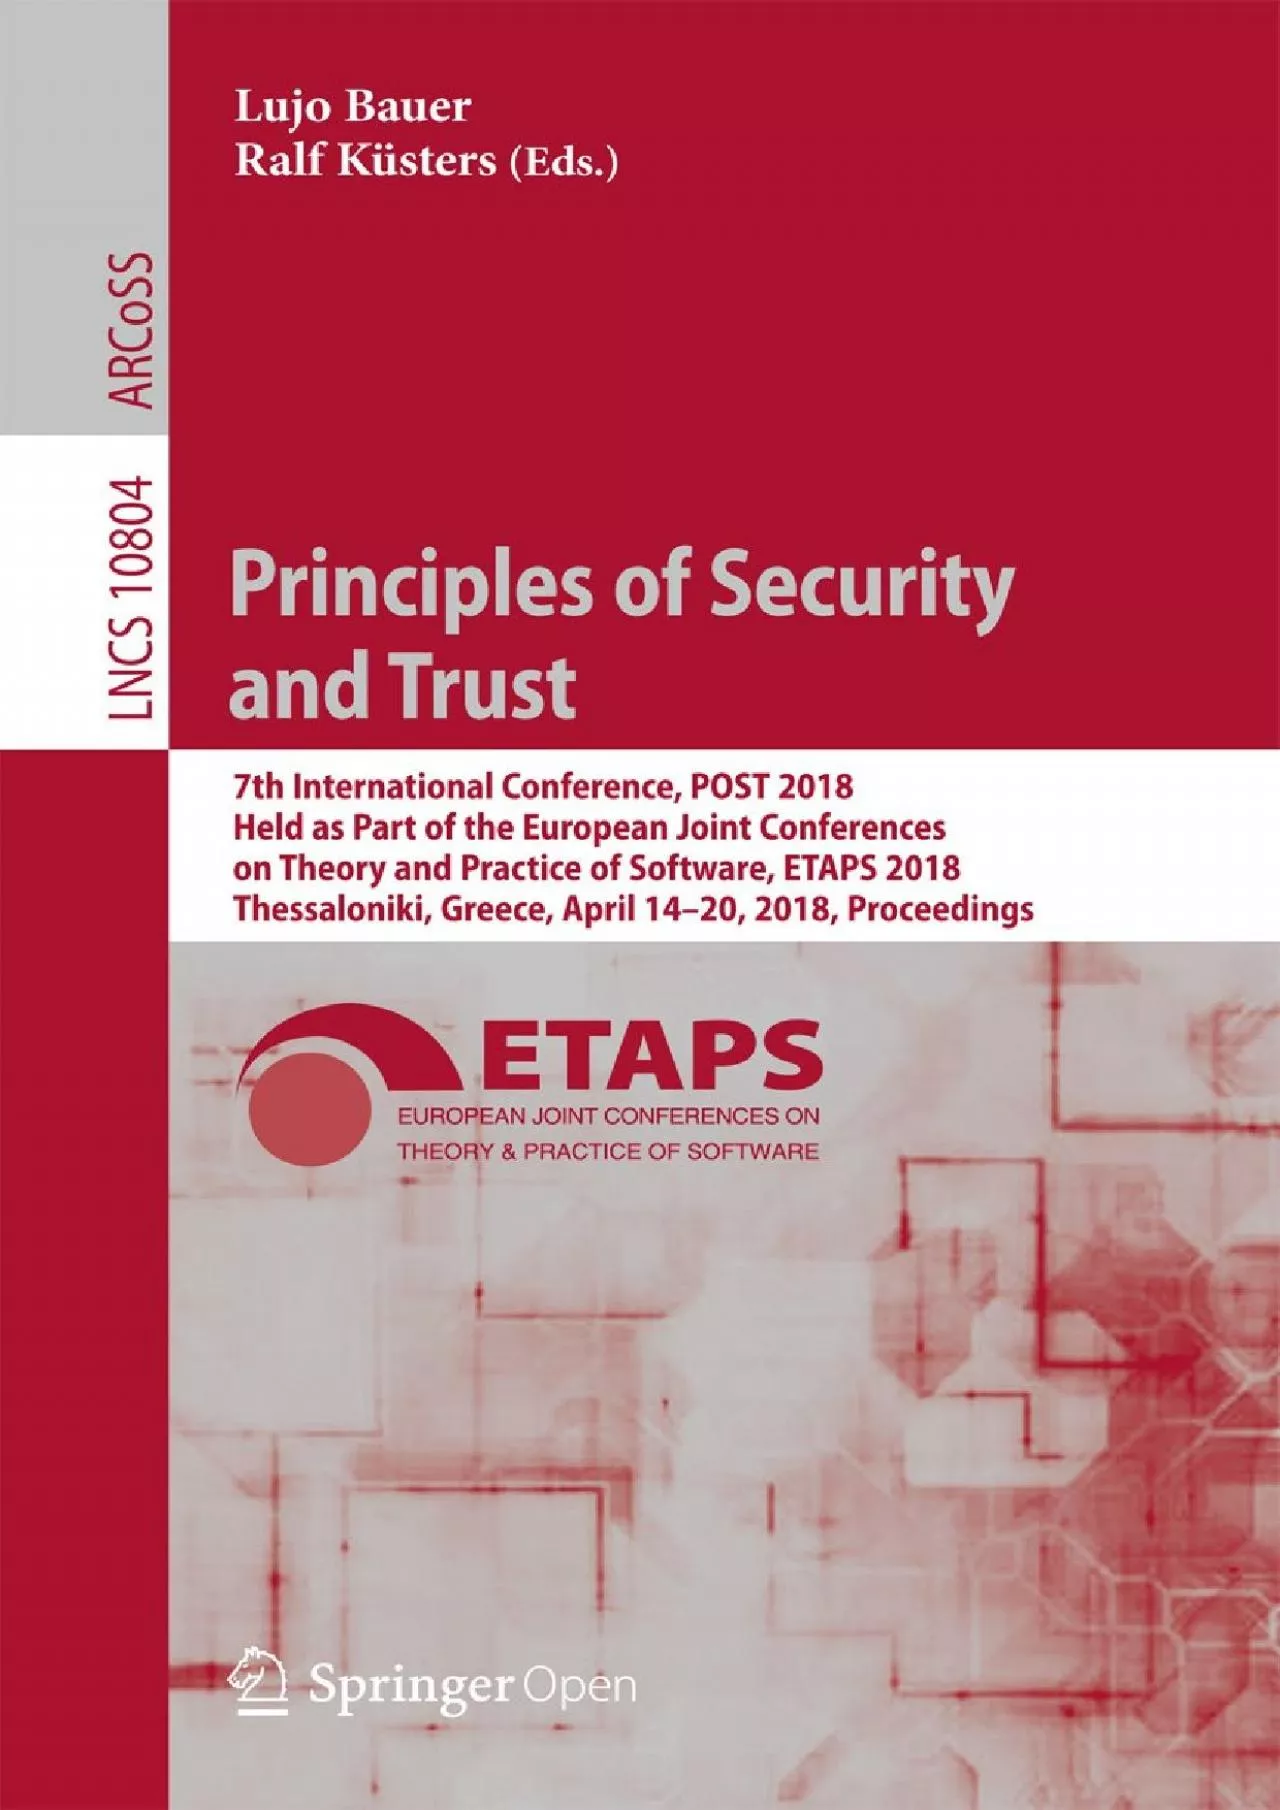 [READING BOOK]-Principles of Security and Trust: 7th International Conference, POST 2018,